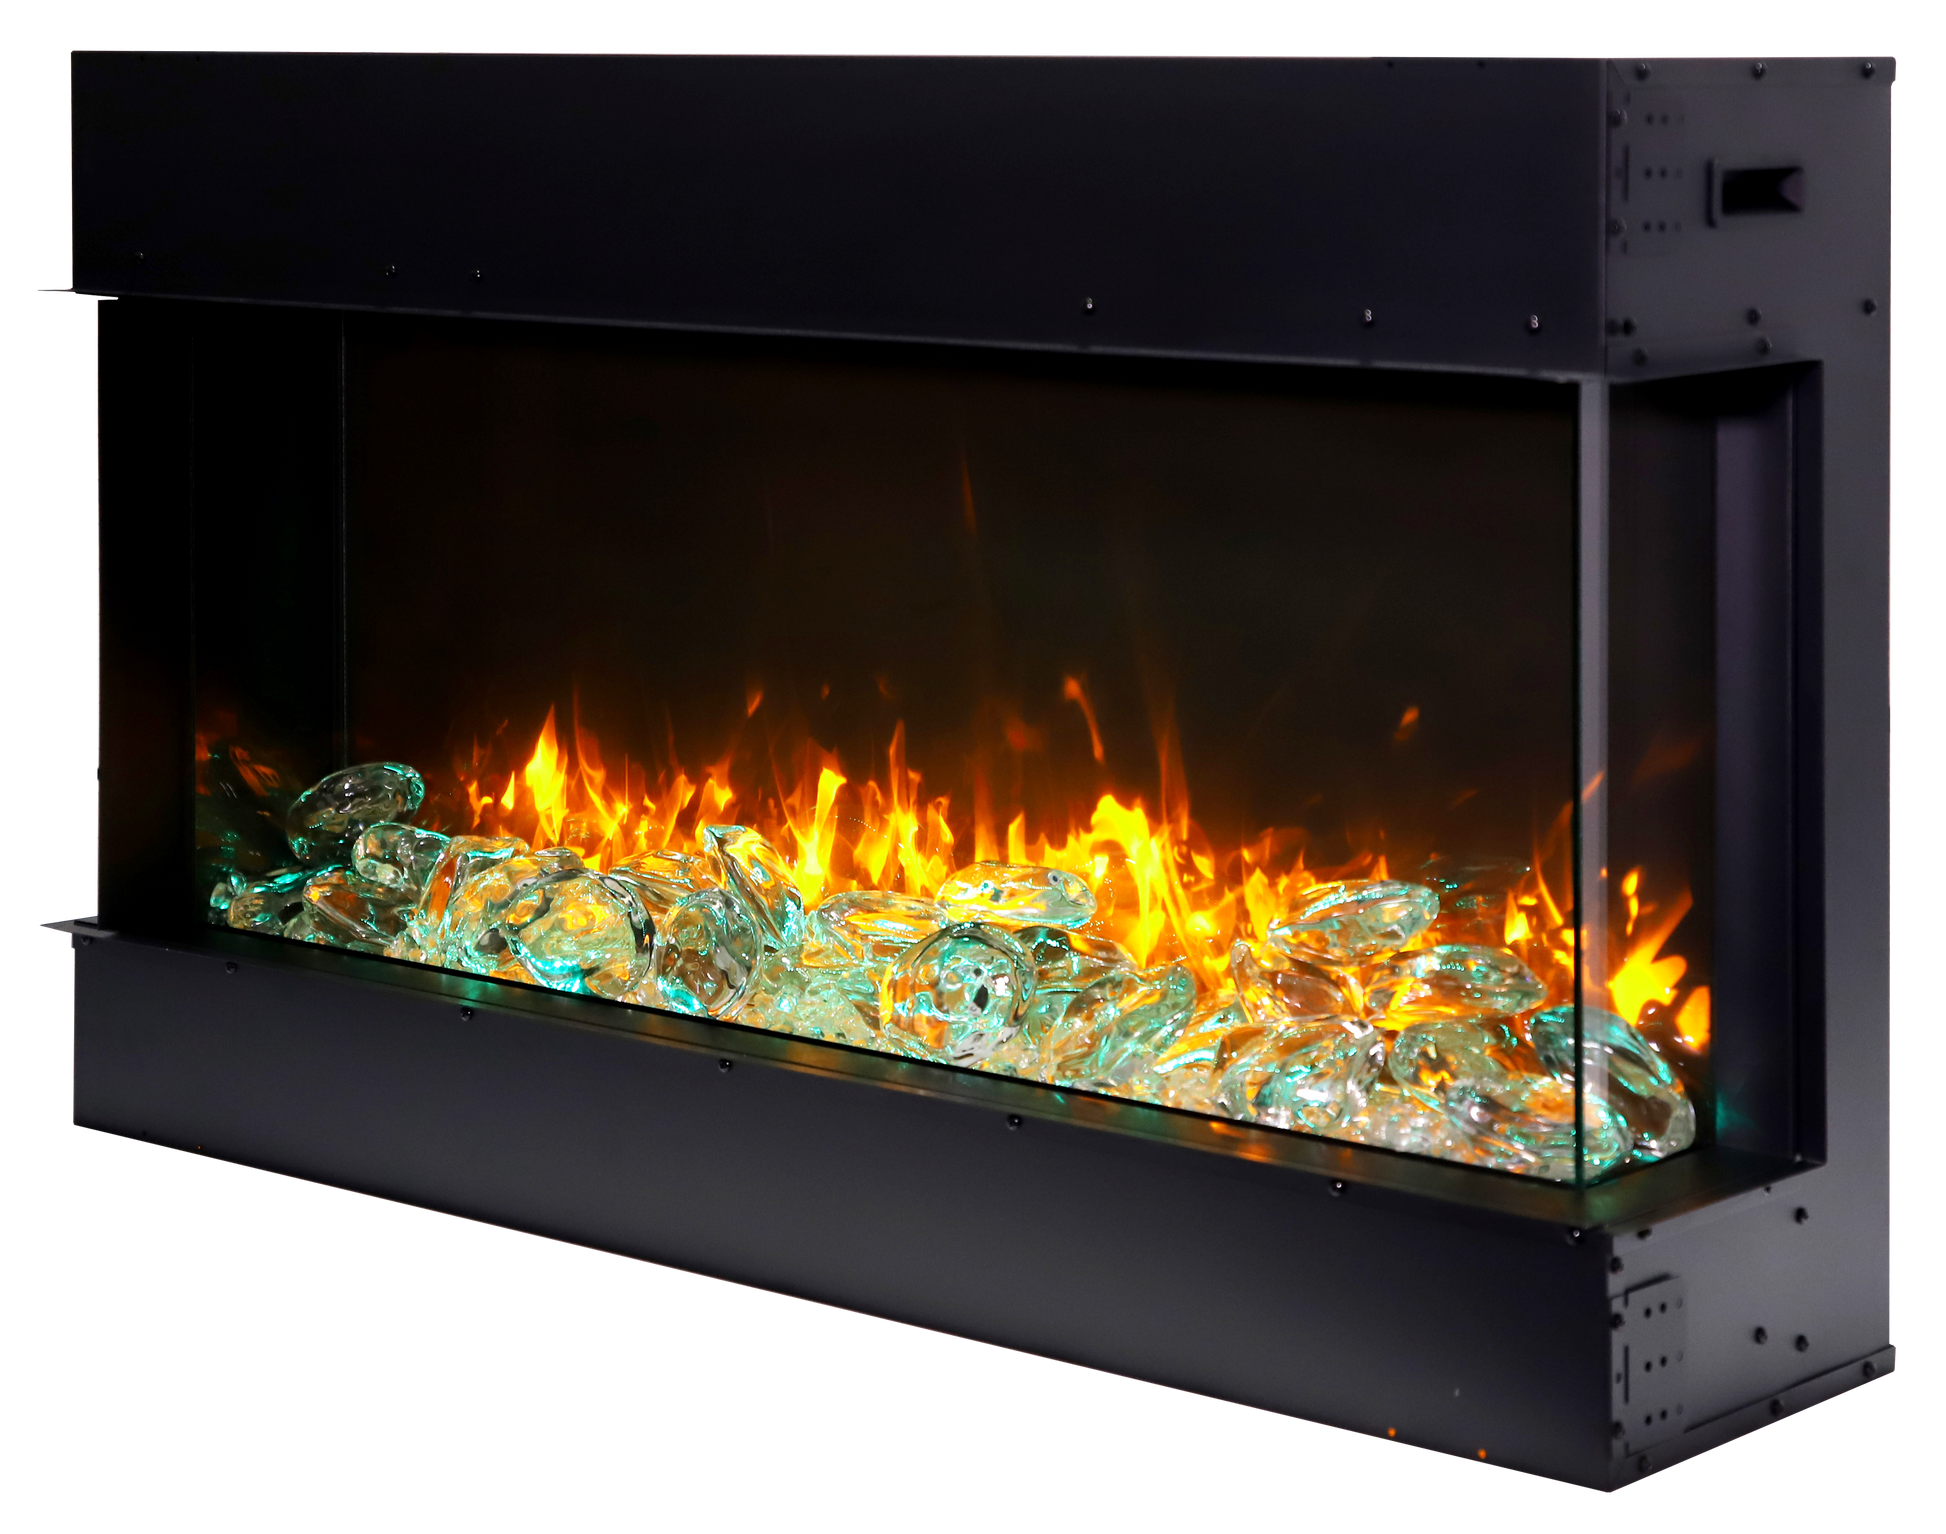 BAY-SLIM 3 Sided Electric Fireplace | Remii | Buy Fireplaces Online